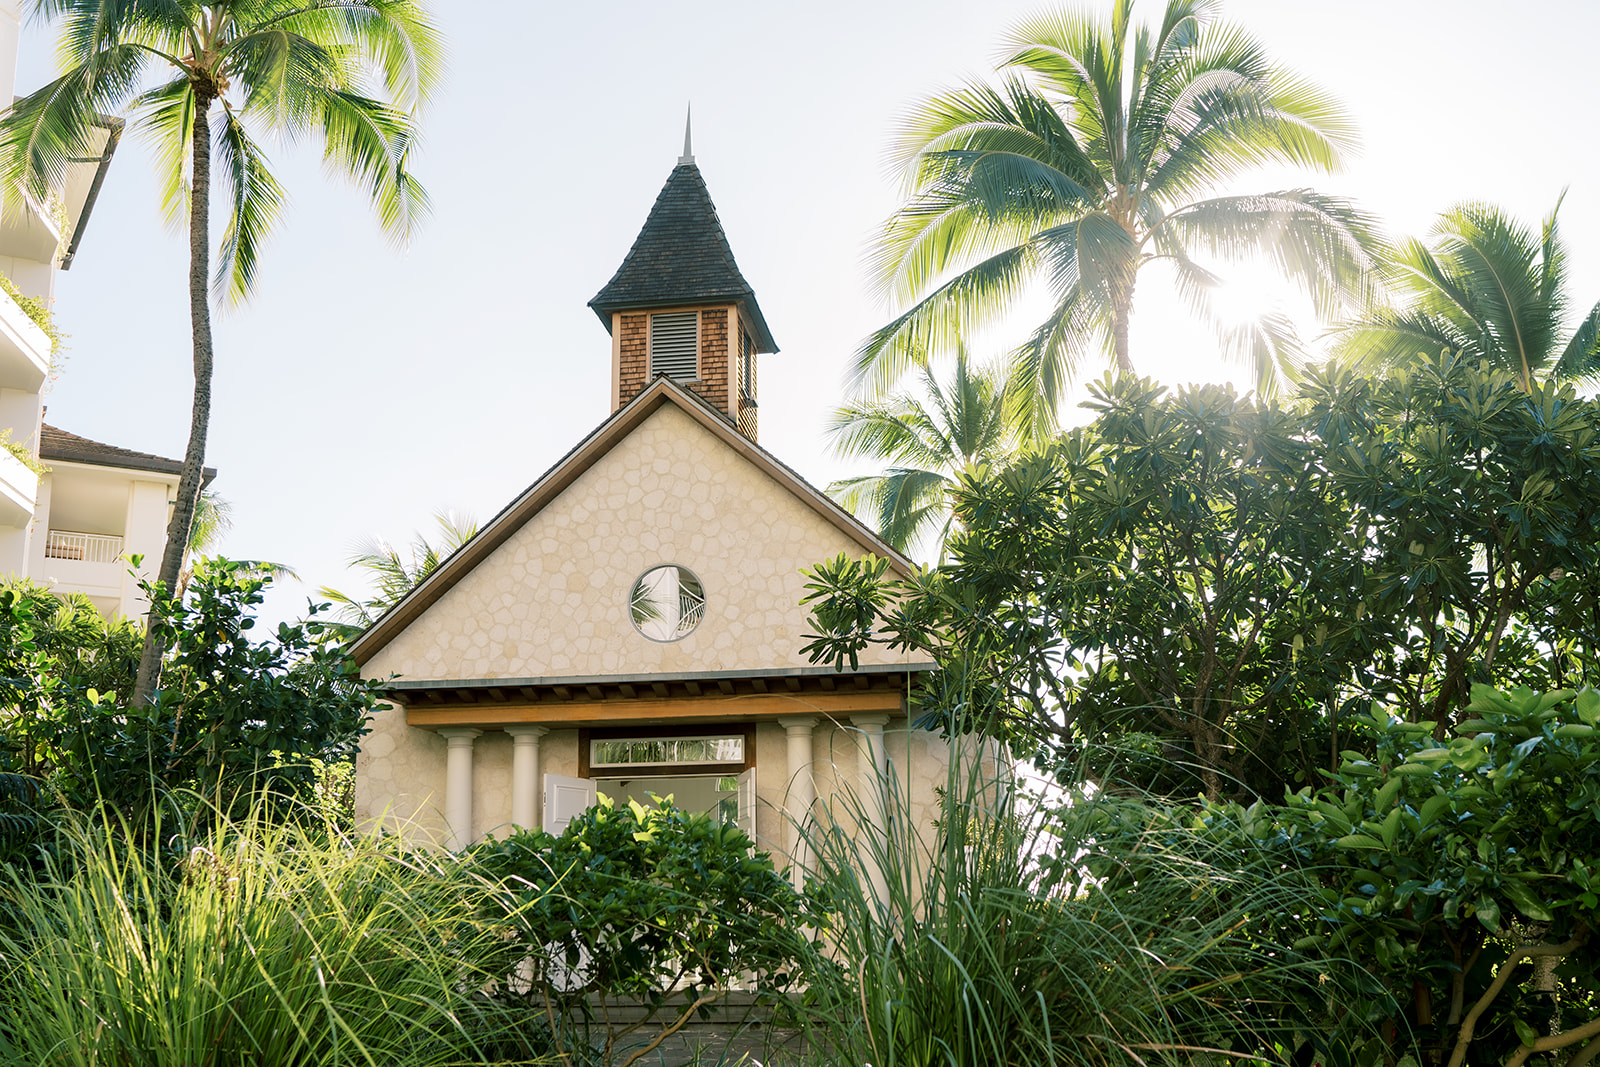 A small chapel in The Four seasons surrounded by palm trees.